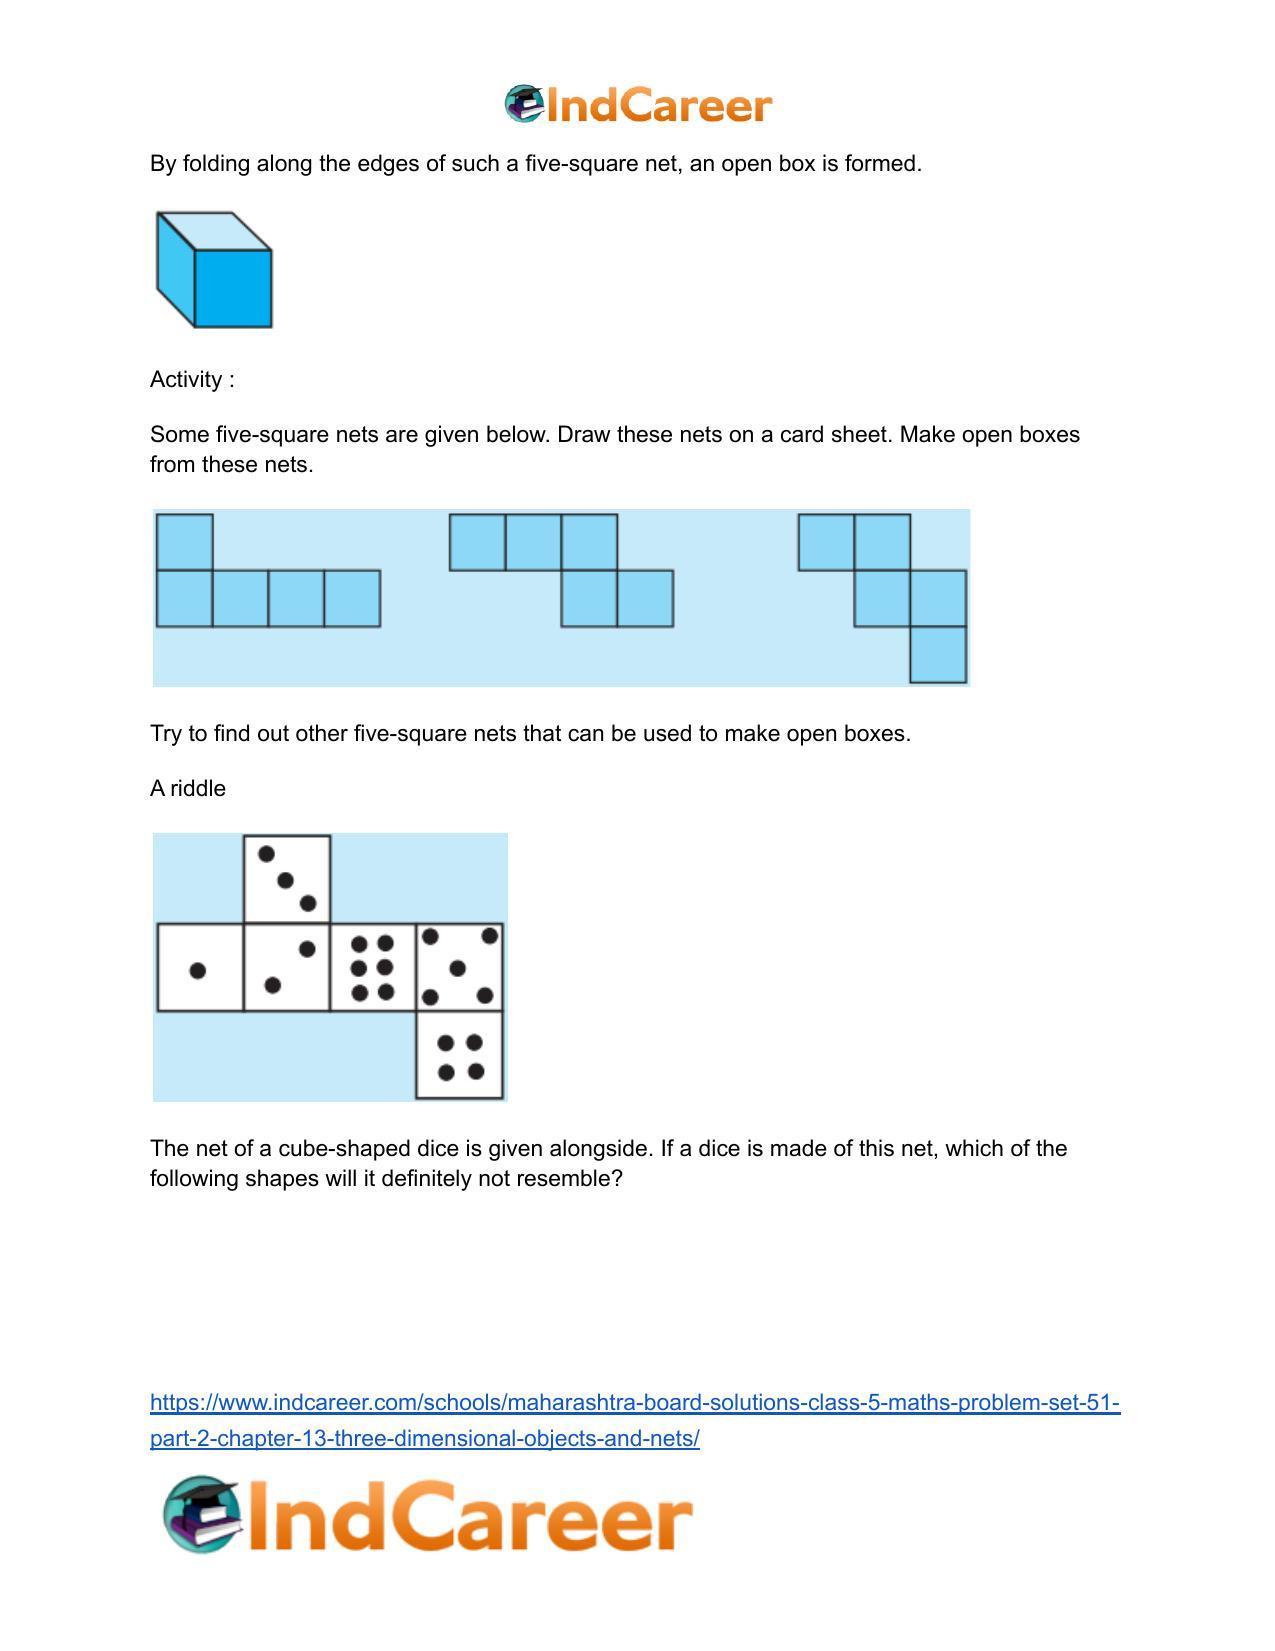 Maharashtra Board Solutions Class 5-Maths (Problem Set 51) - Part 2: Chapter 13- Three Dimensional Objects and Nets - Page 7